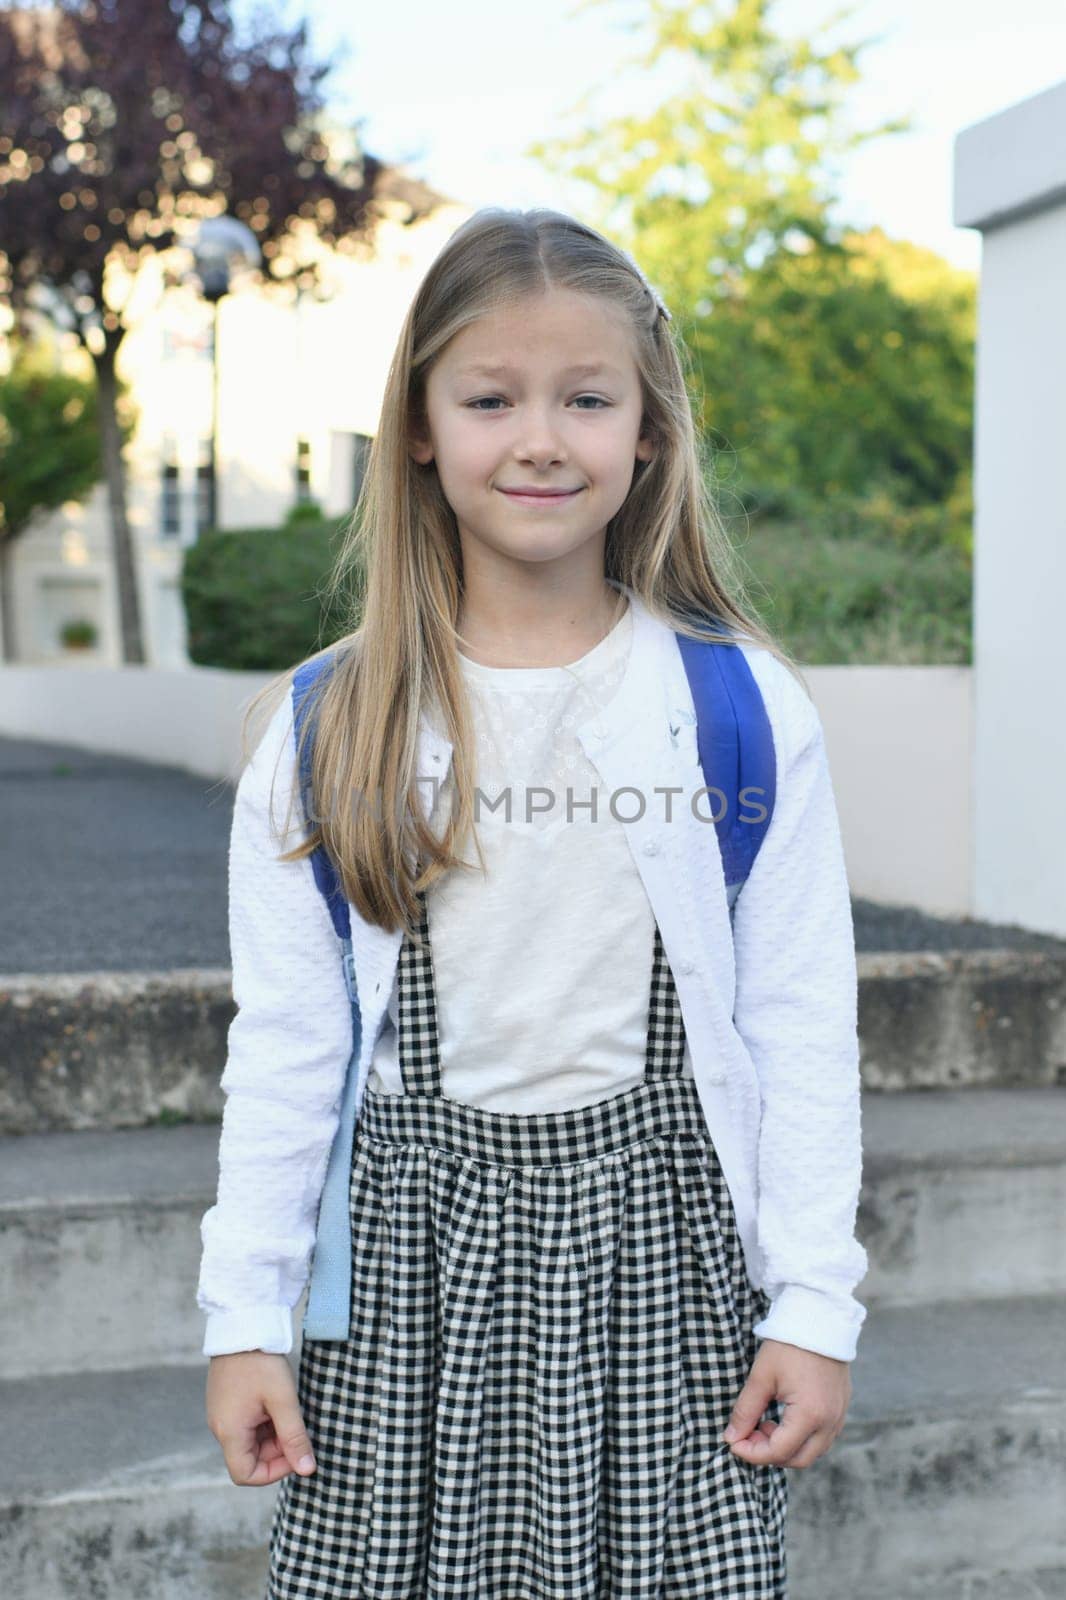 A girl in a school uniform and a backpack back to school